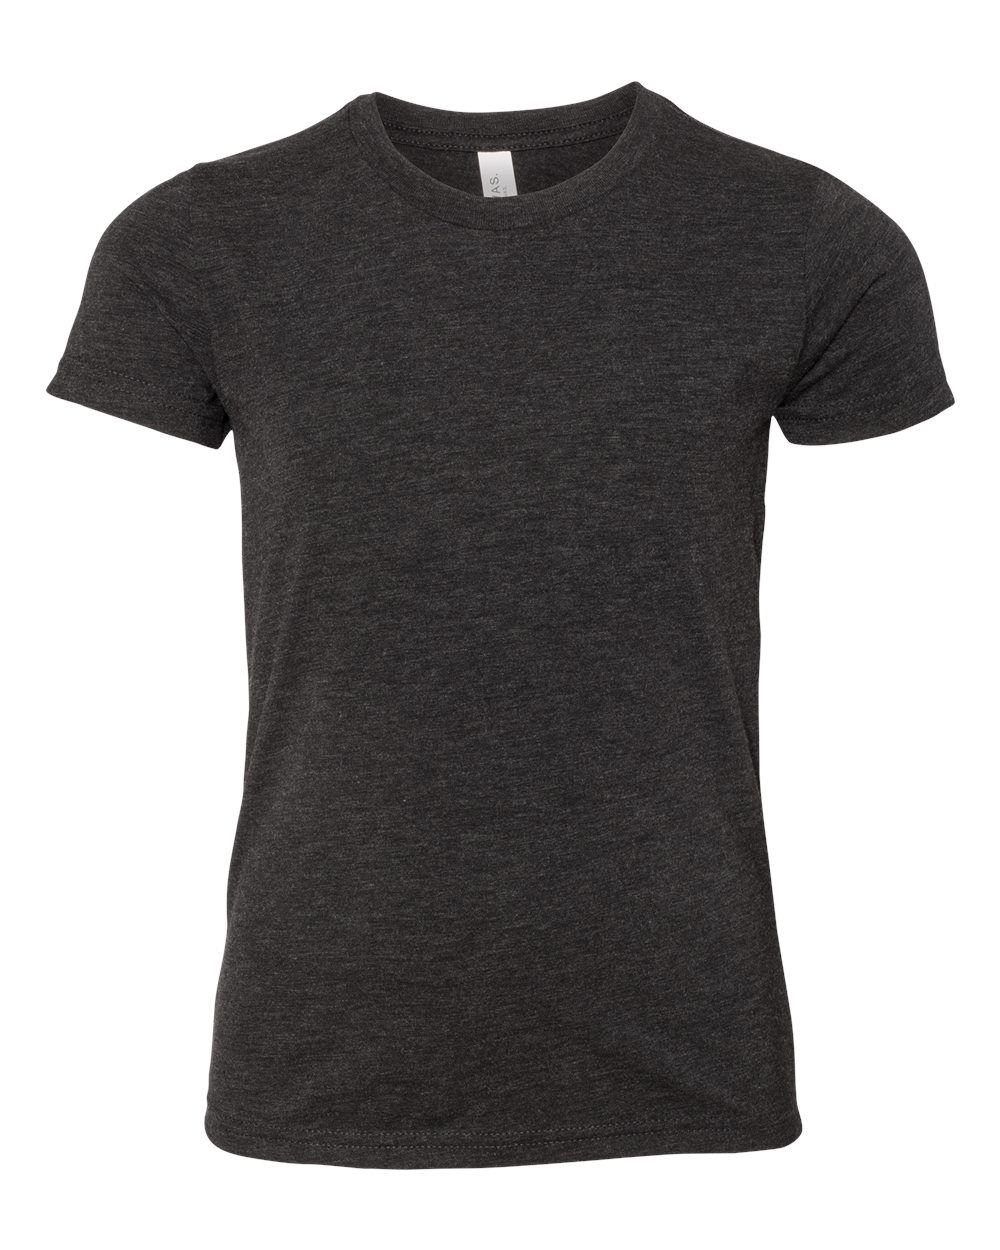 click to view Charcoal-Black Triblend